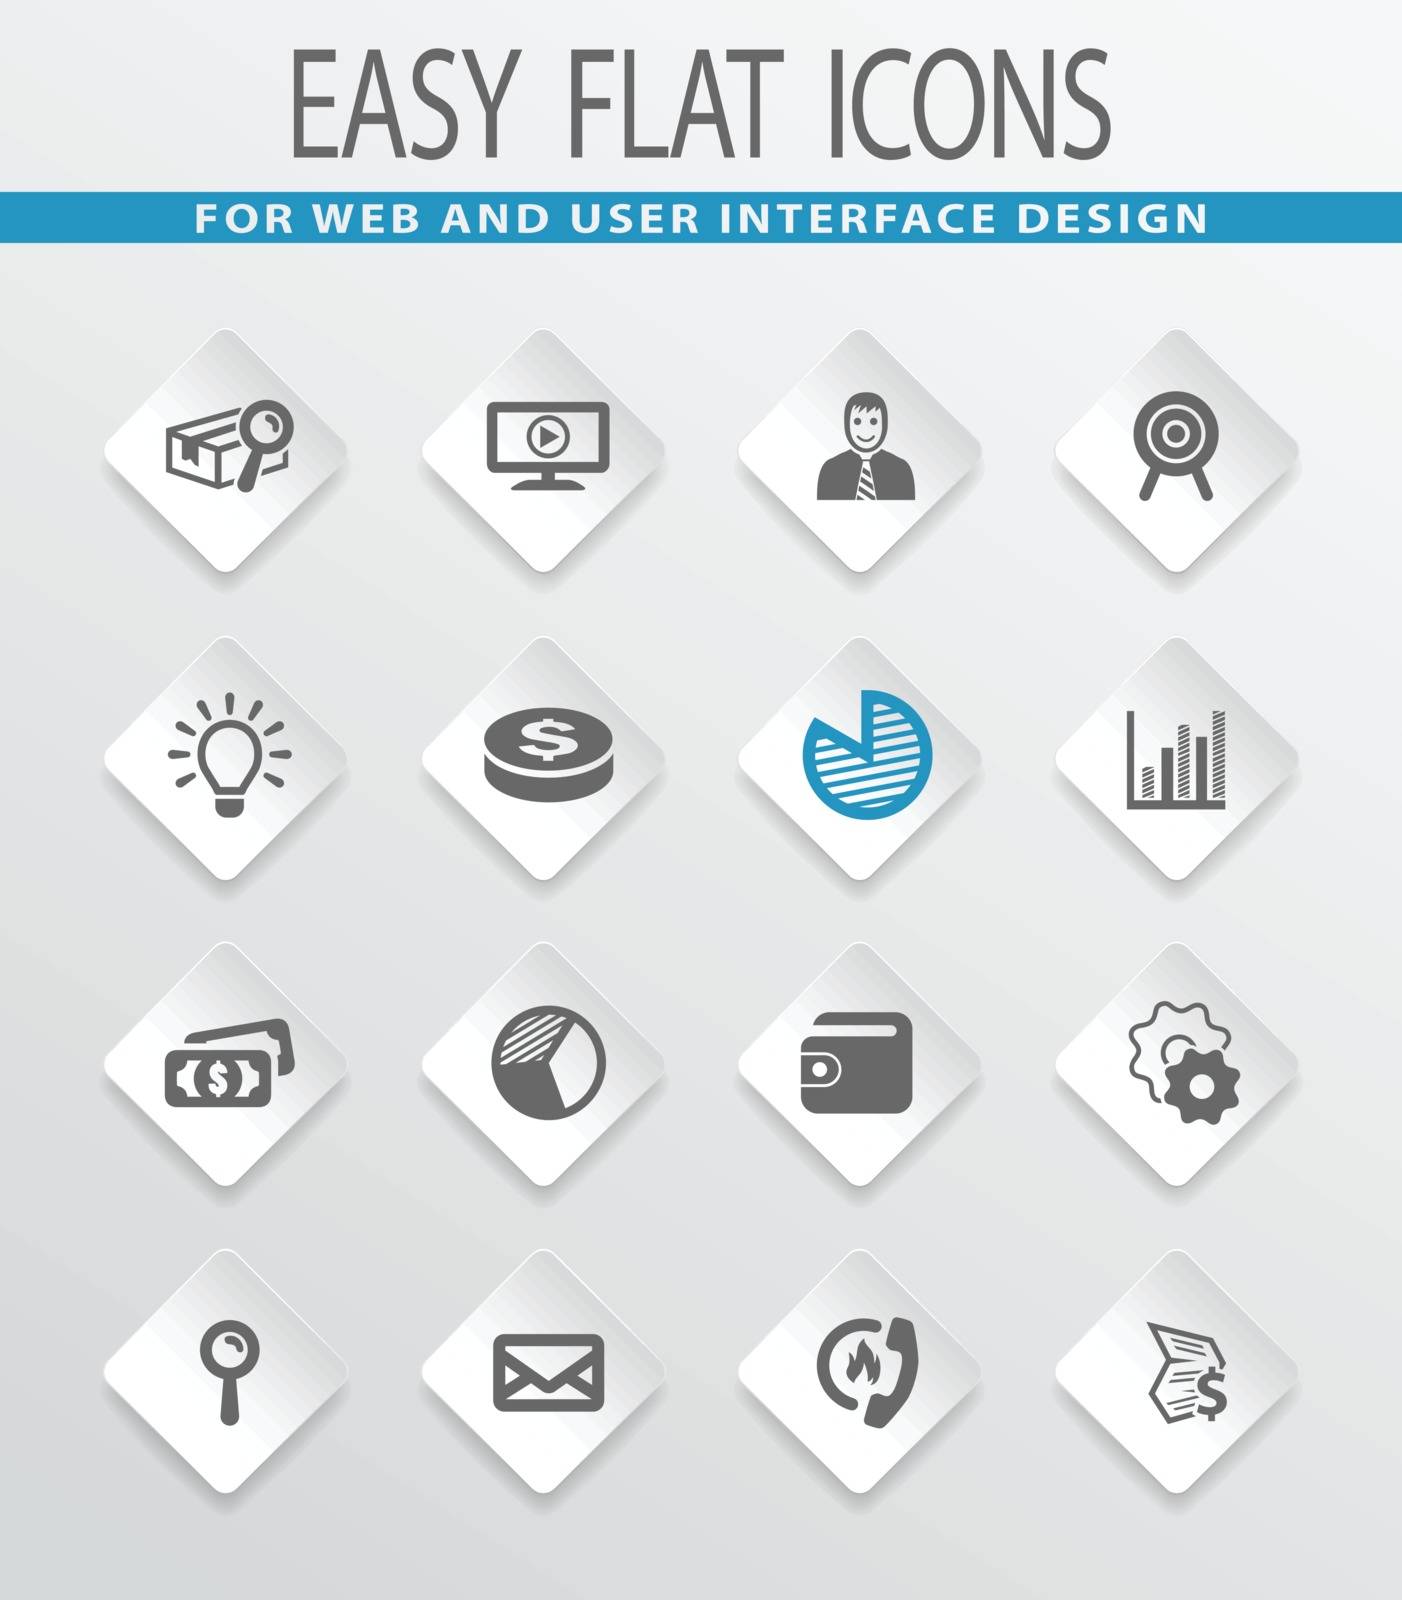 Marketing flat vector icons for user interface design